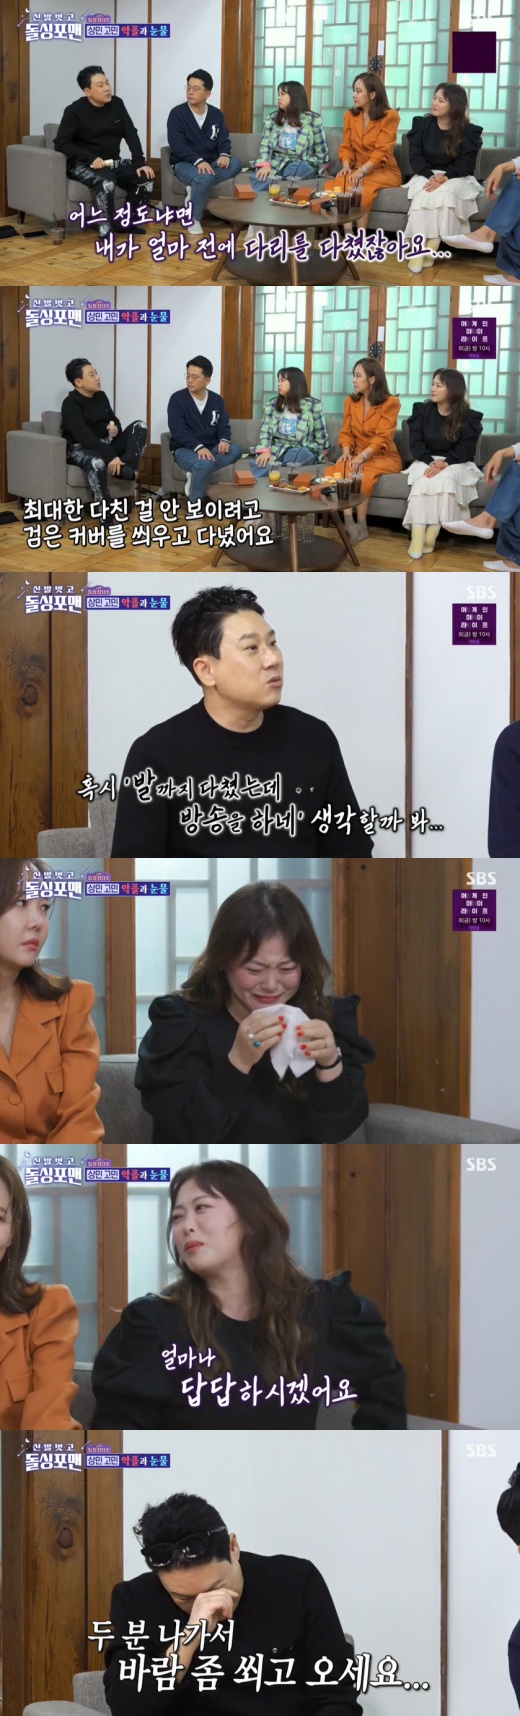 Singer Lee Sang-min from the group Lula expressed his heartfelt feelings about the evil.On the night of the 29th, SBS Shoes naked and stone-singing man appeared in Sim Jin-hwa, So-jin, and Hong Hyun-hee.On this day, the cast of Dolsing Forman had a time of consultation. Lee Sang-min said, I am a little worried ... to be honest.I even hurt my leg, and I put on a black cover like a shoe to make sure that the viewers do not see it as much as possible.Because he said, Do you come out to broadcast even though he hurt his foot, take a break?Shim Jin-hwa, who heard Lee Sang-mins story, burst into tears with sadness. Shim Jin-hwa said, The landlord who lived before did not give 200 million won.I am so sympathetic that the cost of the lawsuit is 5 million One, but the money is getting bigger as I spend the money I should not use. He said, How frustrating will you be? Lee Sang-min wiped off his moistened eyes, saying, I am happy to talk.Lee Sang-min has become an issue among netizens recently due to suspicions of debt cosplay.He made a character of Gung Sang-min through broadcasting, and he showed his high-priced clothes and was not short of it. He said that he had paid almost all his debts last year and left about 900 million Ones, but he was criticized for increasing his debt again this year.On the 27th, he appeared on SBS Ugly Our Little and showed indirect explanations about the creditor consultation data and the safe filled with debt documents.On the 29th, YouTuber Lee Jin-ho said, Lee Sang-mins allegations of debt cosplay are somewhat exaggerated. He claimed that he had made a huge amount of money through broadcasting over the past 15 years but failed to settle his debt due to malicious debt.Lee Jin-ho said, Lee Sang-min lives in Yongsan for 4 million One Monthly Rent. Recently, he moved to Paju with a deposit of 50 million One and Monthly Rent 2 million One.It seemed like a luxury mansion on the air, but it is a place where there is no basic convenience facility in Paju as an outskirts development area.As Lee Sang-mins broadcasting activities, which have taken some company debts, have increased, creditors have demanded more than the original repayment based on interest and mental damage compensation.Lee Sang-min has been quietly responding to demands because he can face a situation where it becomes more difficult to repay if this is announced. The creditor demanded 2.4 billion won for interest and long-term debt.Lee Sang-min has had quite a mental struggle, according to The Inner Circle.In the end, the legal representatives of both sides adjusted the amount and finalized the debt amount to 1.7 billion won at the end of last year.Lee Sang-mins final debt is expected to increase to 1.3 billion One. Also, Lee Sang-mins The Inner Circle horse said, Lee Sang-min thinks that you can feel that you are a cosplay that is enough for viewers.As of the end of last year, we have finished discussing all the debt amounts, so we will have a little room in the future. 